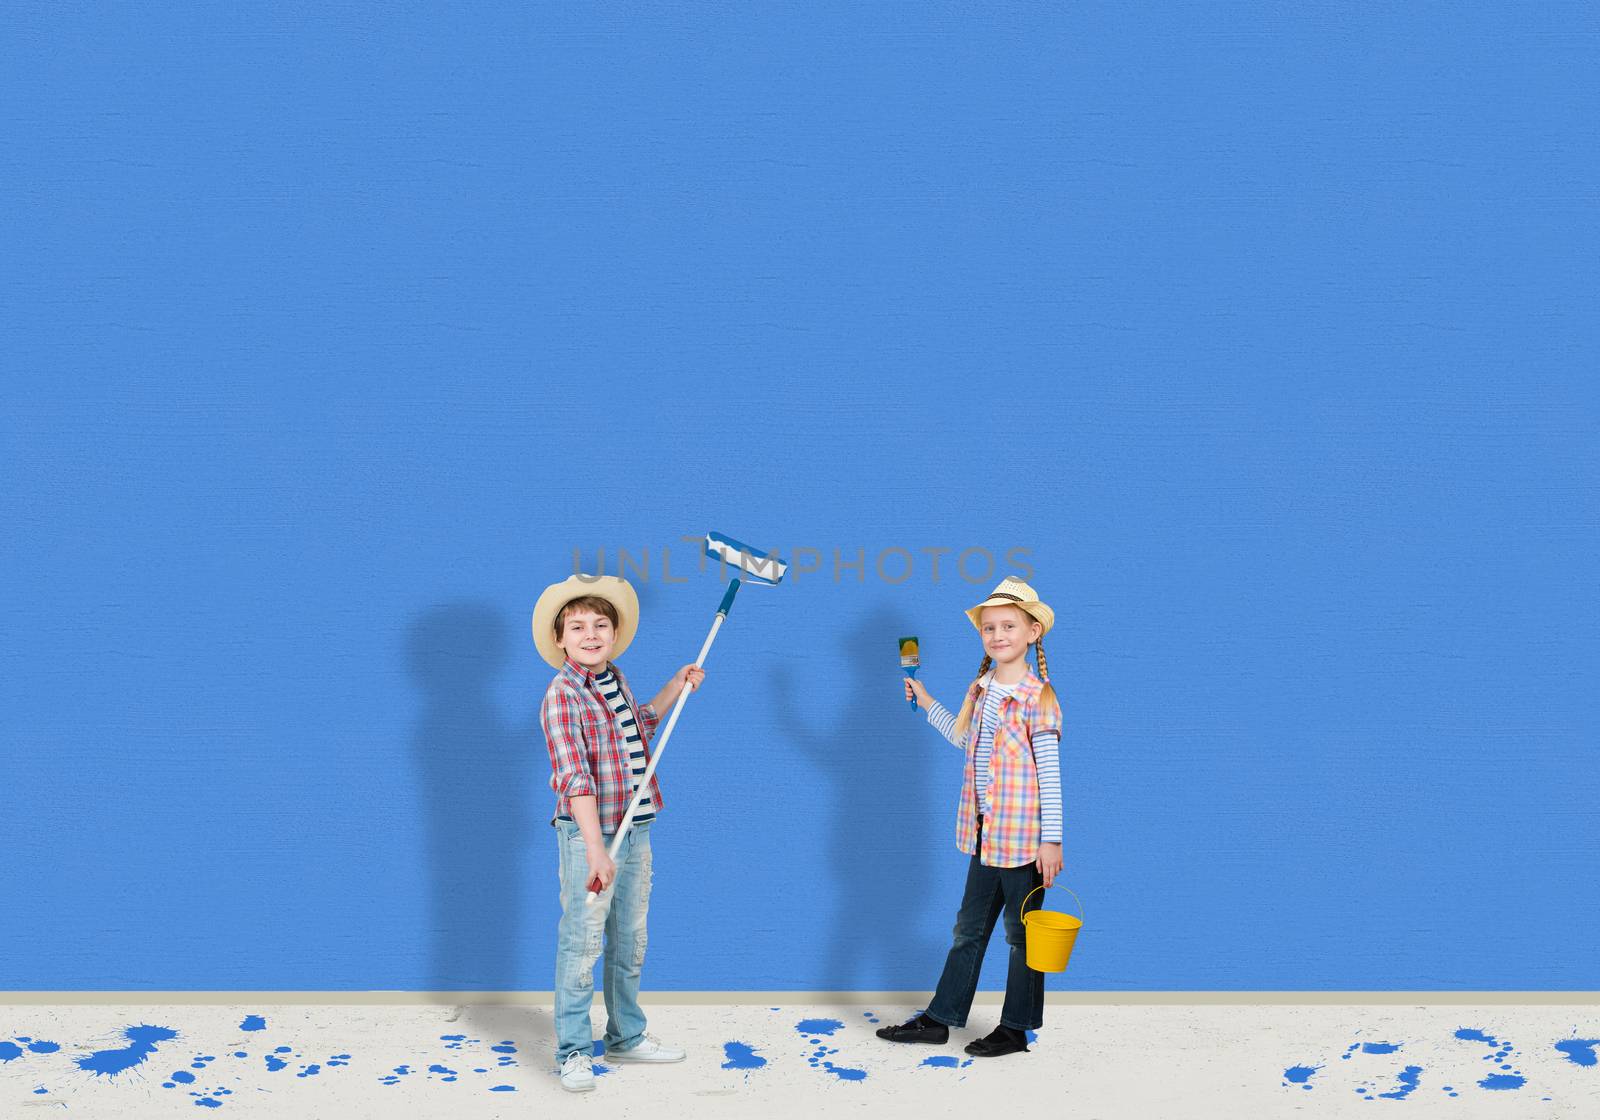 image of a children finished painting the wall